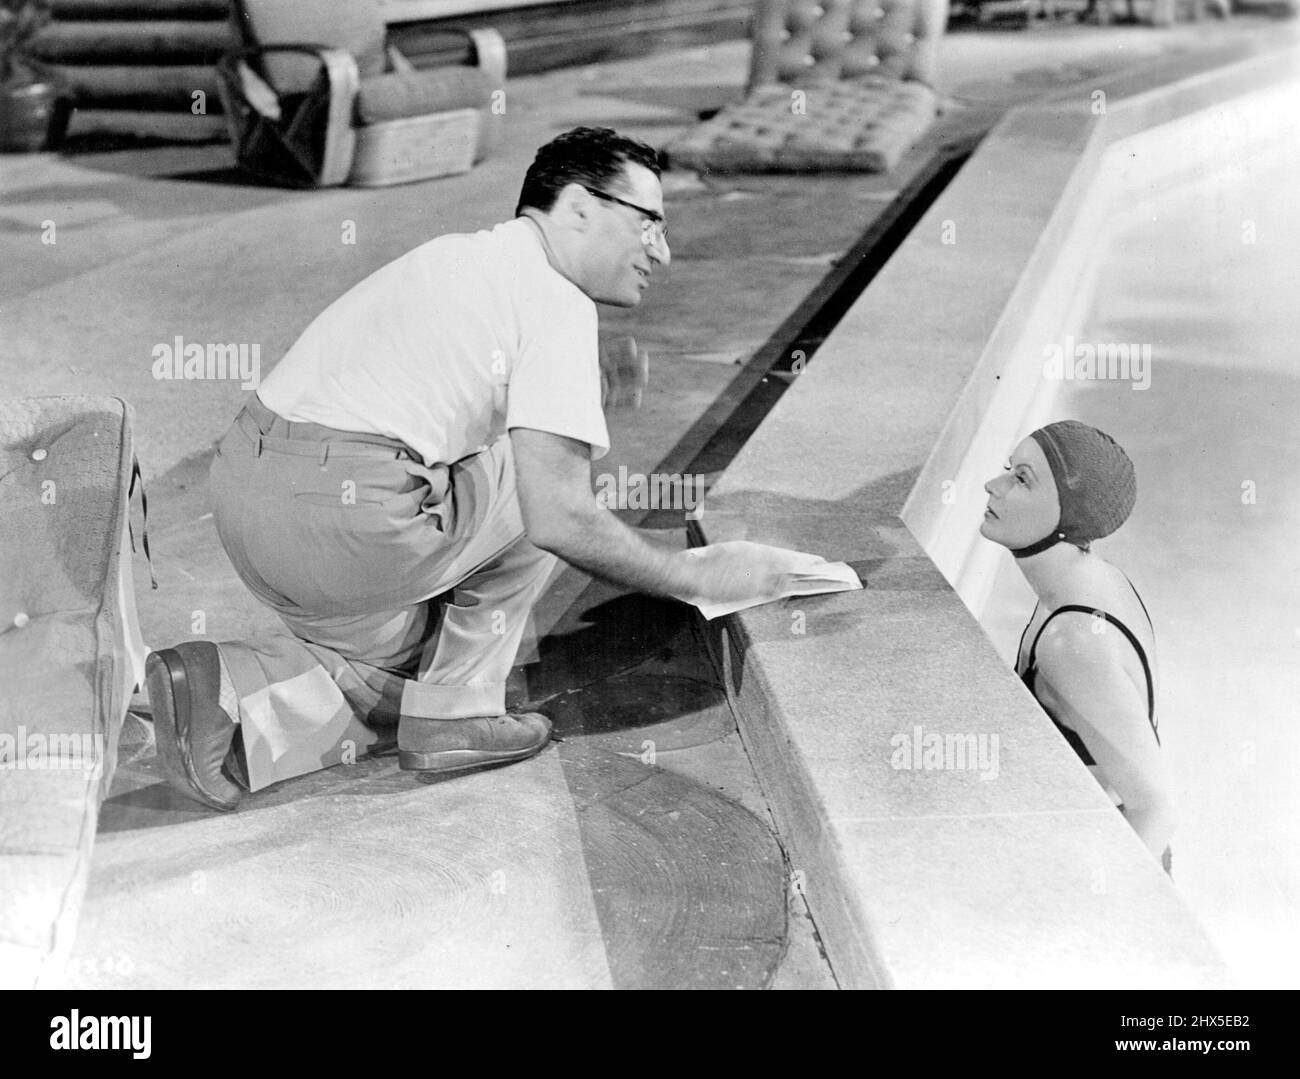 Garbo Swims ... And director George Cukor sees that she does it correctly in her latest Metro Goldwyn - Mayer Comedy, opposite Melvyn Douglas. Featured are Constance Bennett, Ruth Gordon, Roland Young, and Robert Sterling. Gottfried Reinhardt Produced. November 3, 1947. Stock Photo